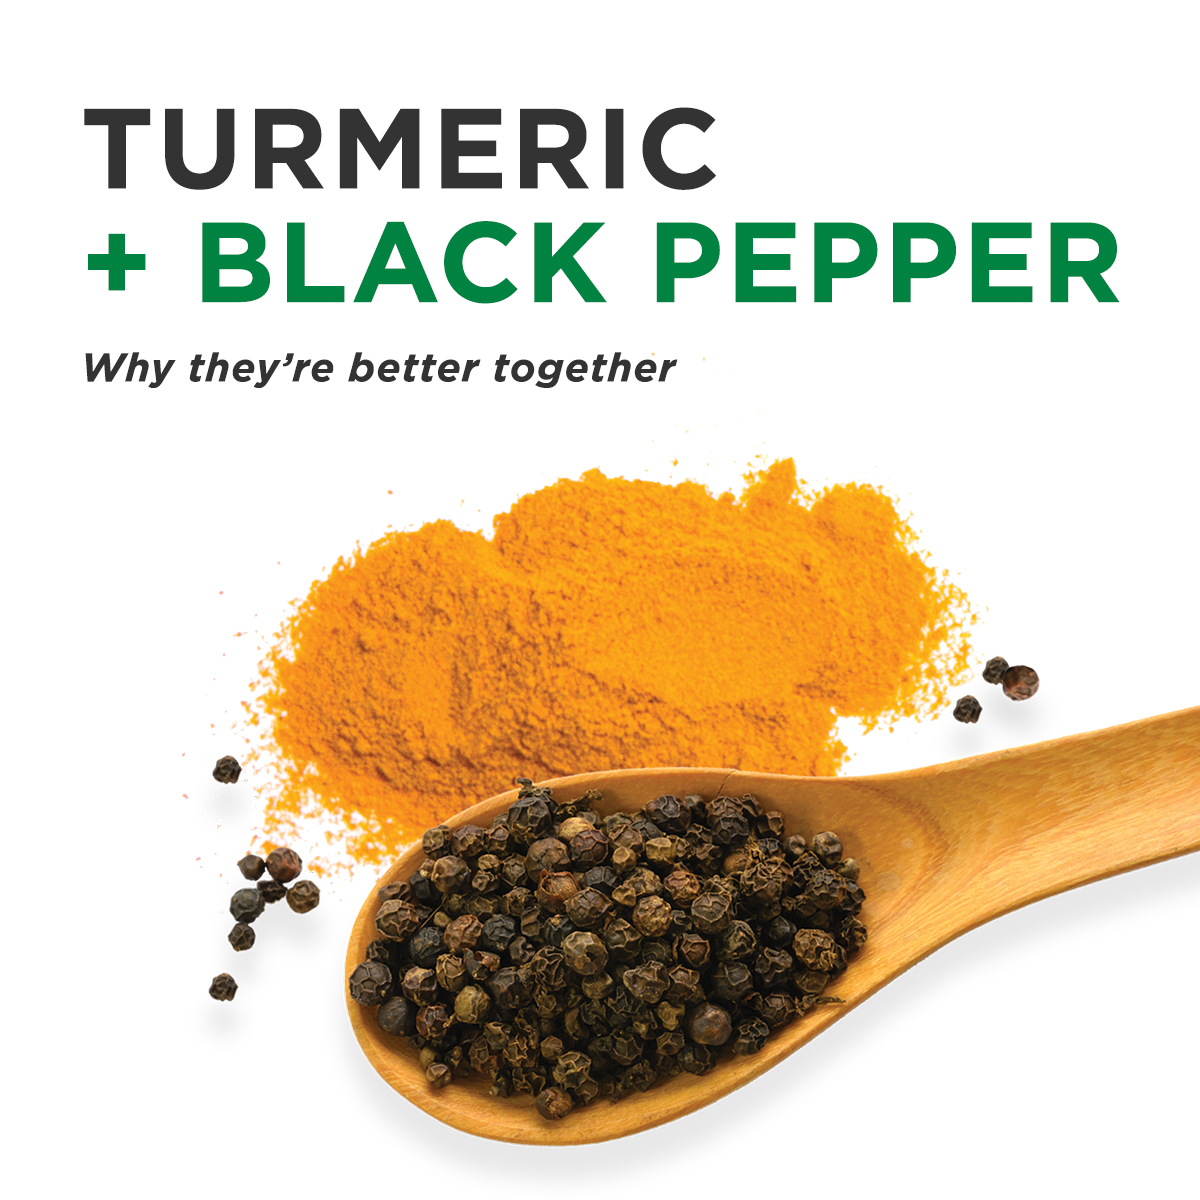 Turmeric & Black Pepper: Why They’re Better Together